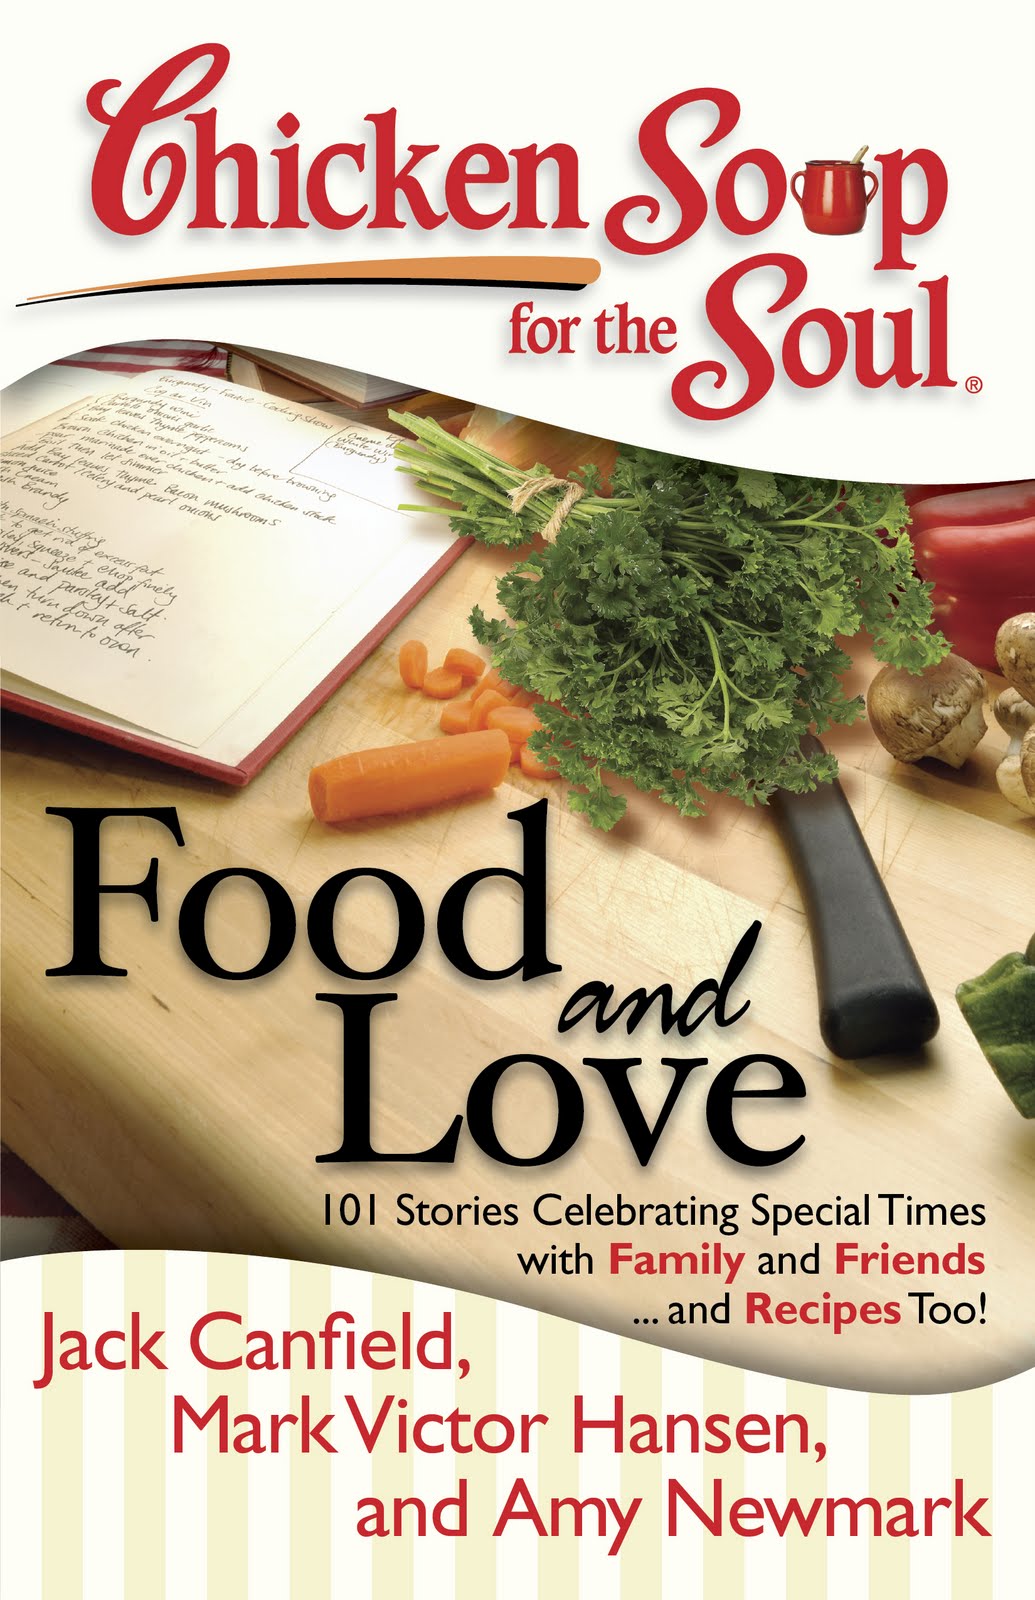 Chicken Soup For The Soul Food And Love Review And Giveaway Ends 4 2 Heavenly Savings